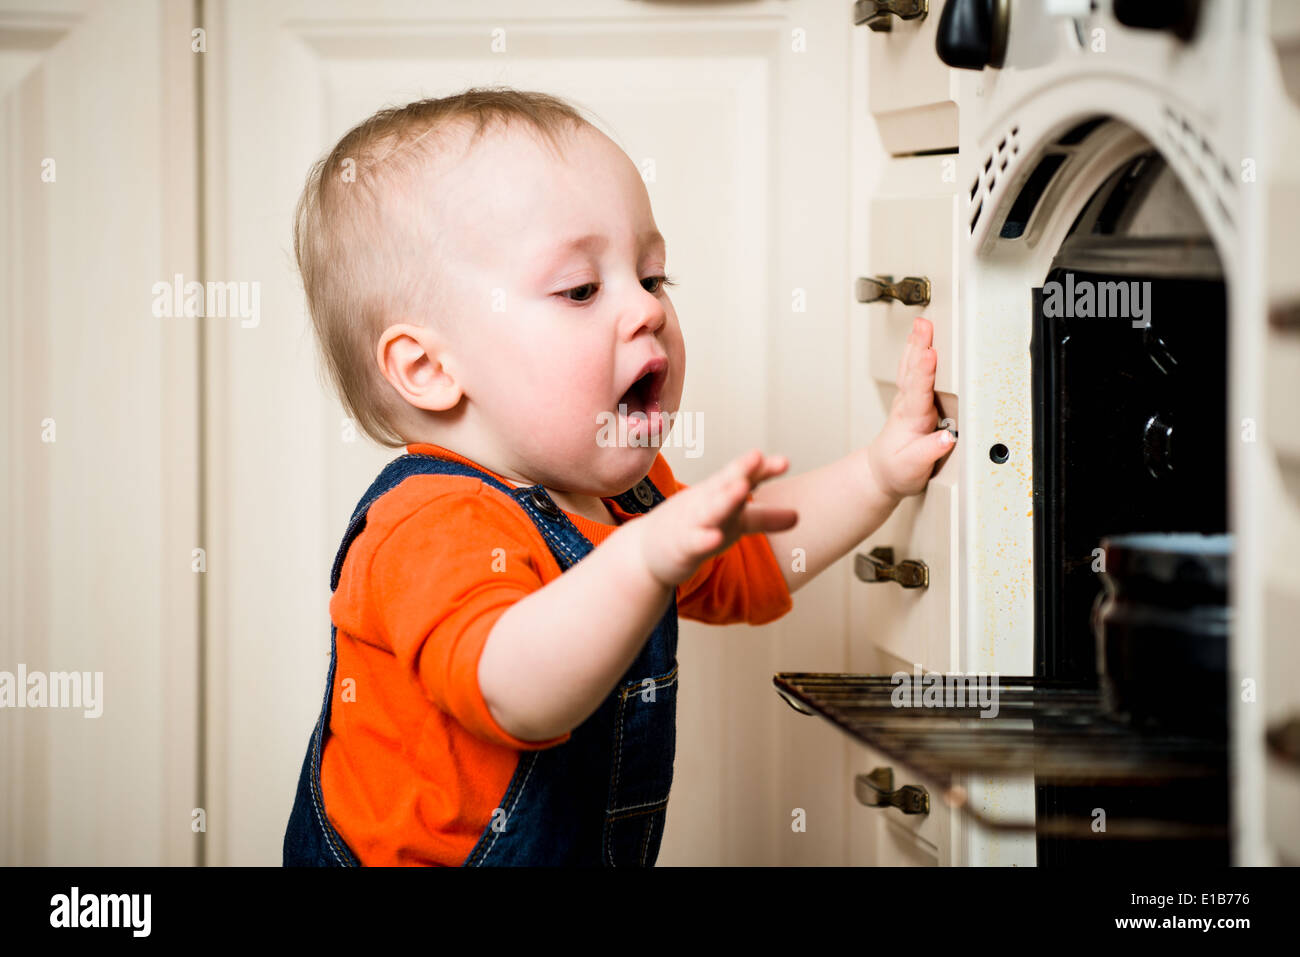 Dangerous situation - little baby opened kitchen oven Stock Photo